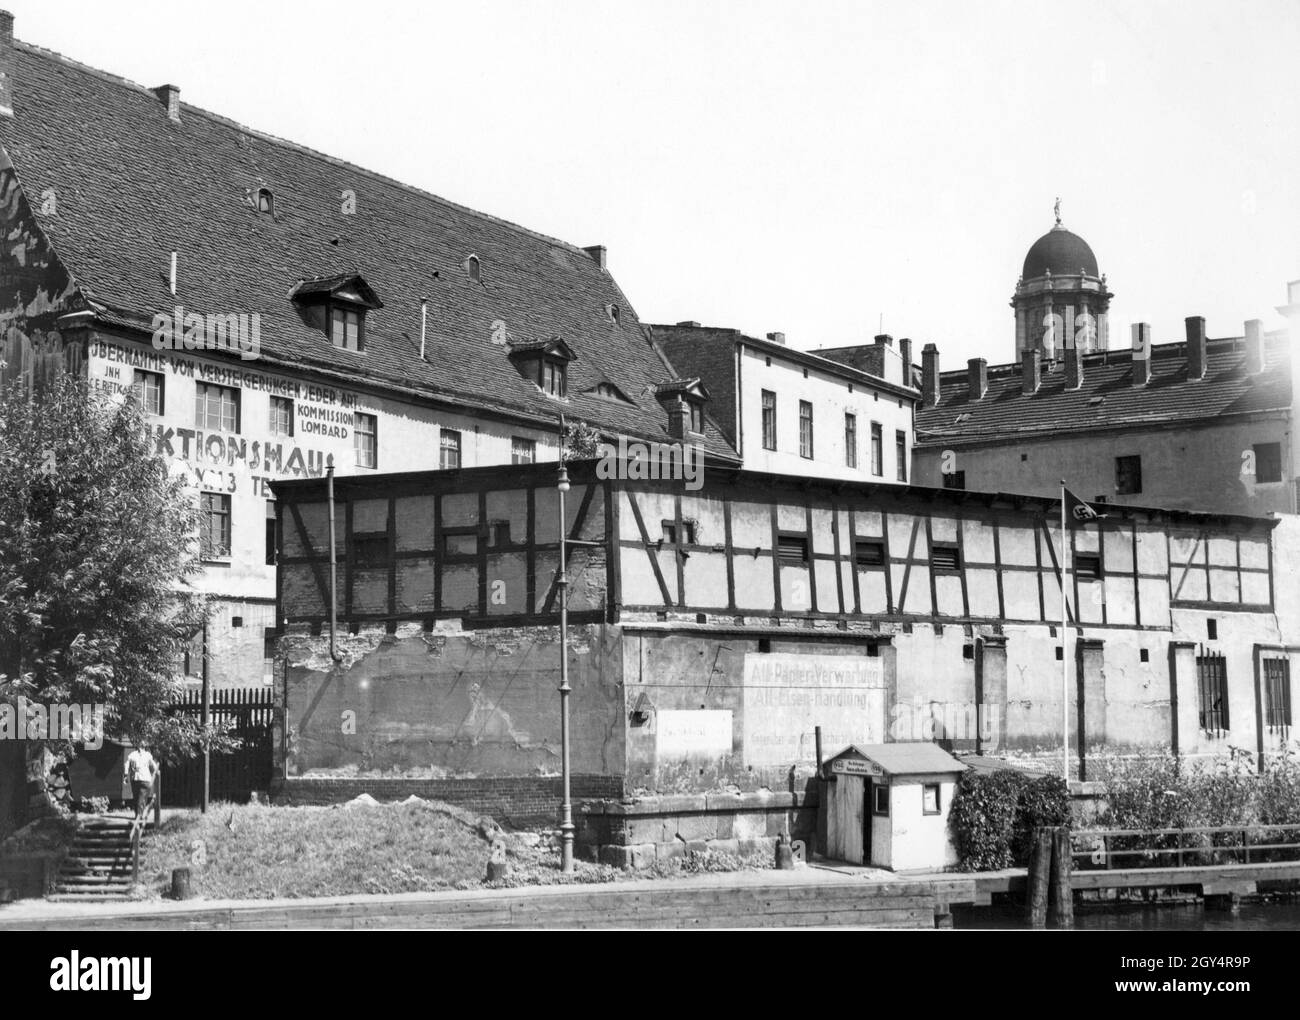 'In July 1934, the last city tour took place through the alley Am Krögel in Berlin-Mitte, whose buildings were demolished shortly afterwards. The picture shows some of the houses that were located near the Old Town House (tower in the background), including a warehouse for ''Alt-Papier-Verwertung, Alt-Eisen-Handlung'' and the auction house of owner C. E. Bittkar with ''Übernahme von Versteigerungen jeder Art. Commission Lombard''. [automated translation]' Stock Photo